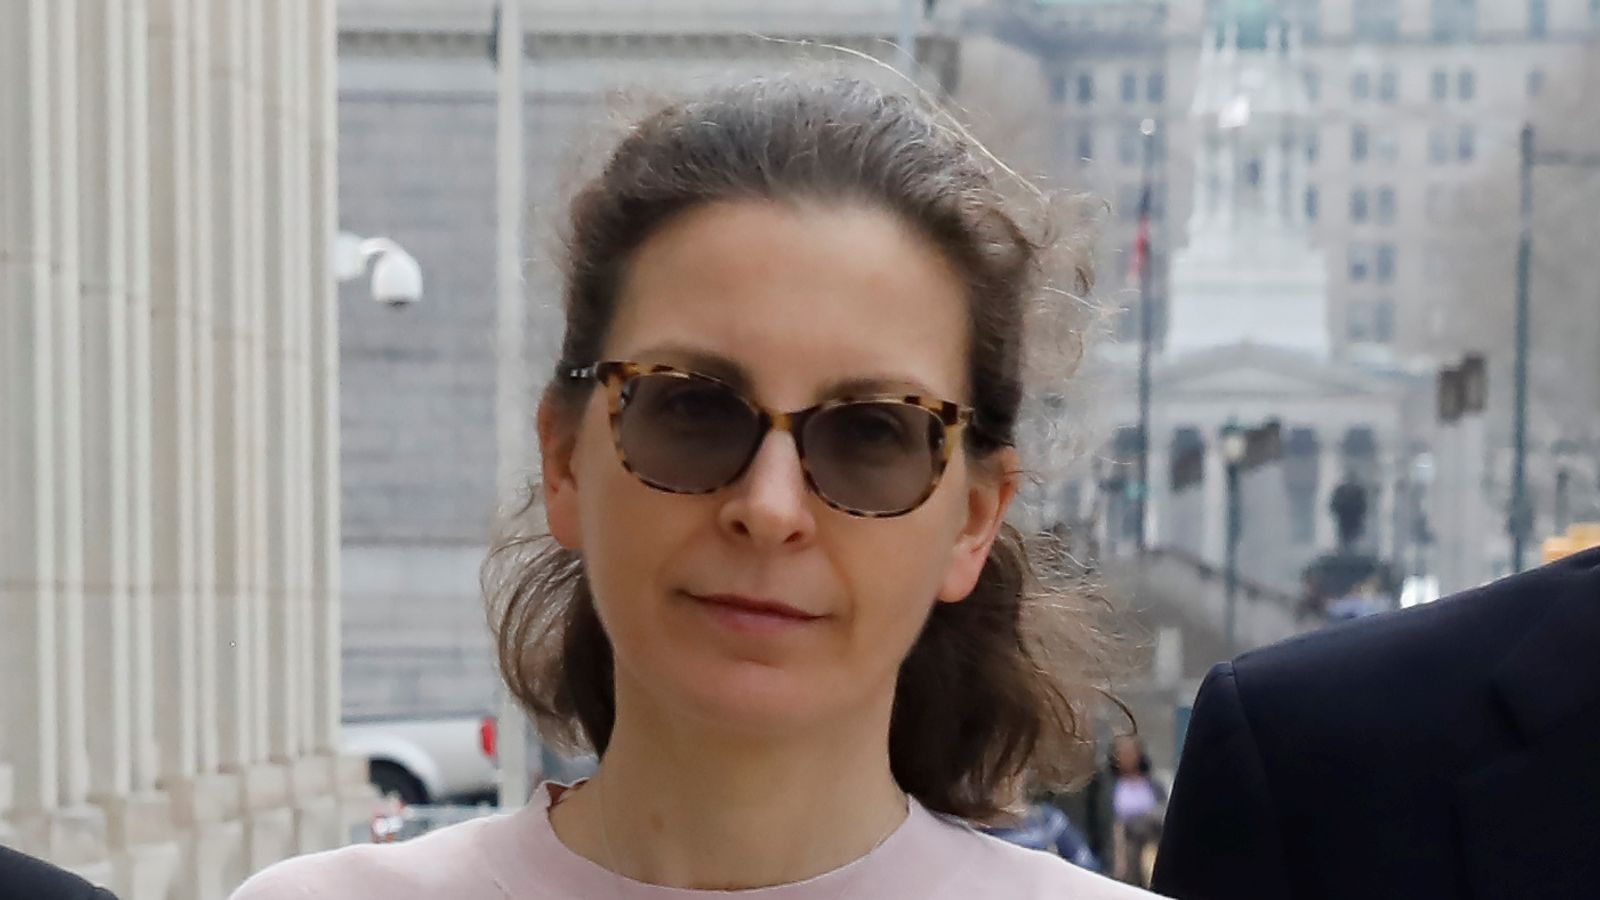 Seagram Heiress Clare Bronfman Jailed For Six Years Over Role In Nxivm Sex Slaves Cult Us News 2462